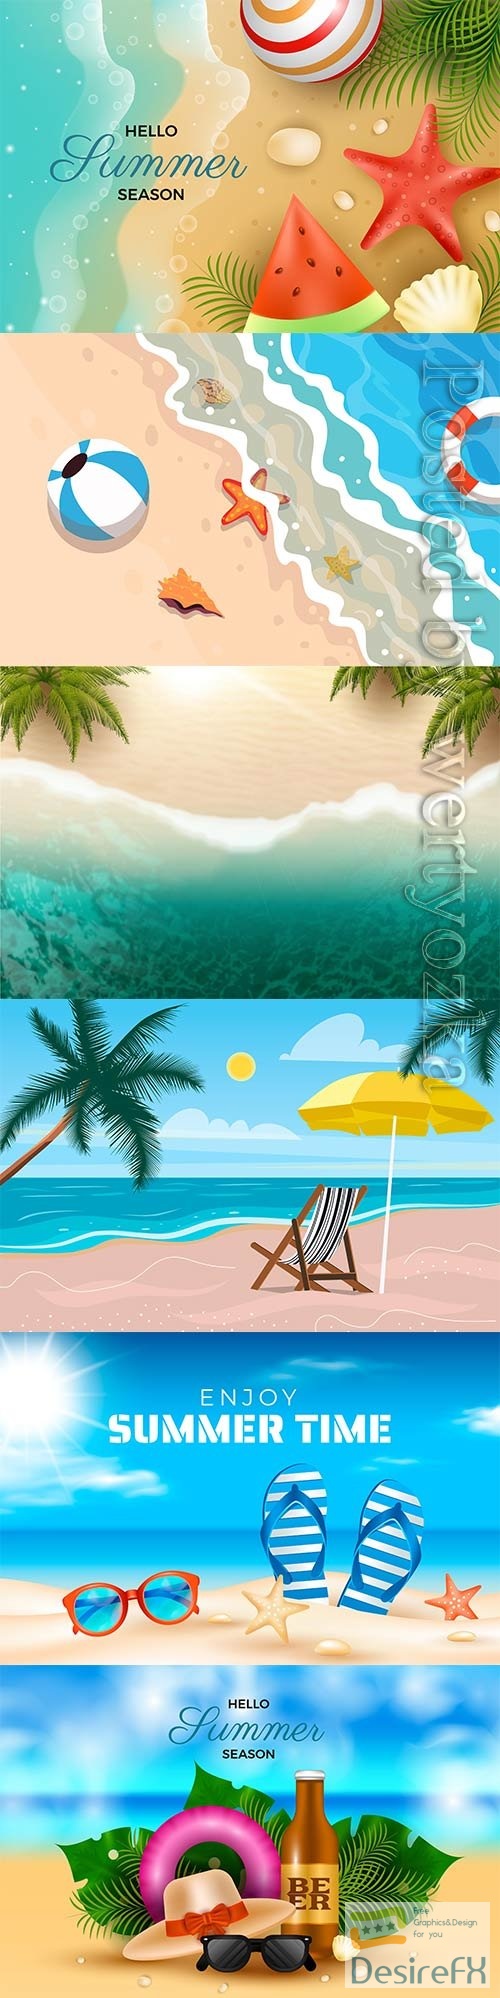 Realistic summer vector background